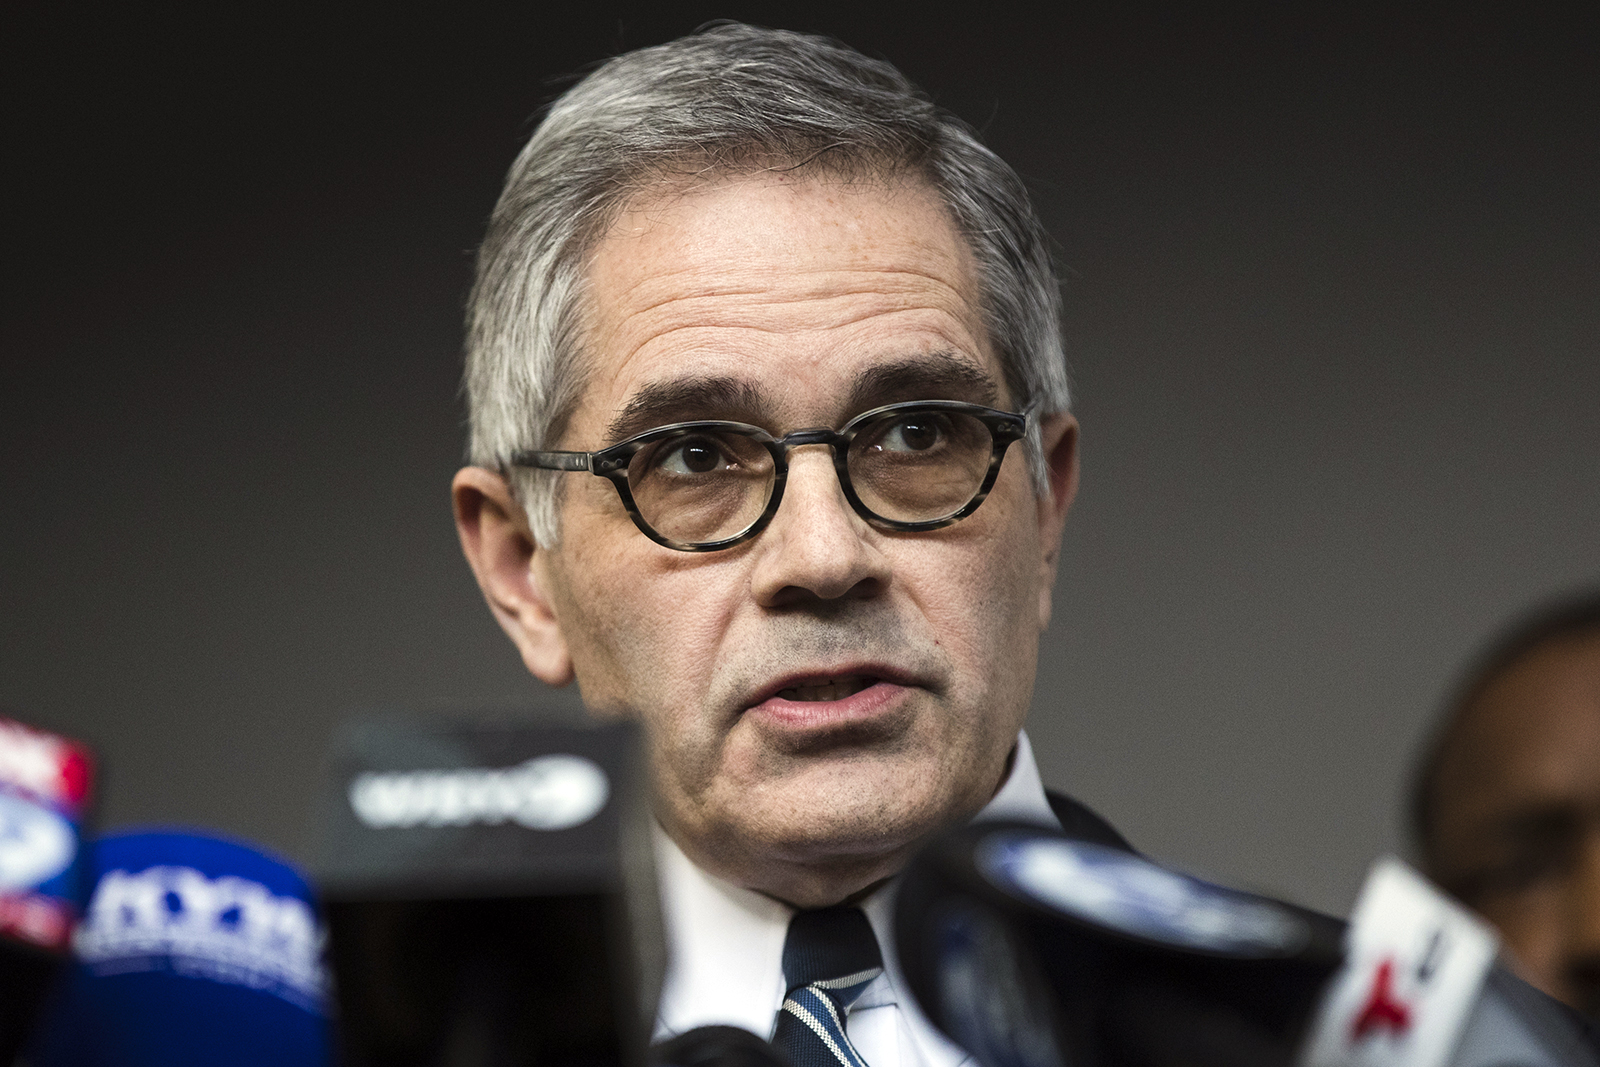 FILE - In this March 6, 2019, file photo, Philadelphia District Attorney Larry Krasner speaks during a news conference in Philadelphia. (AP Photo/Matt Rourke, File)